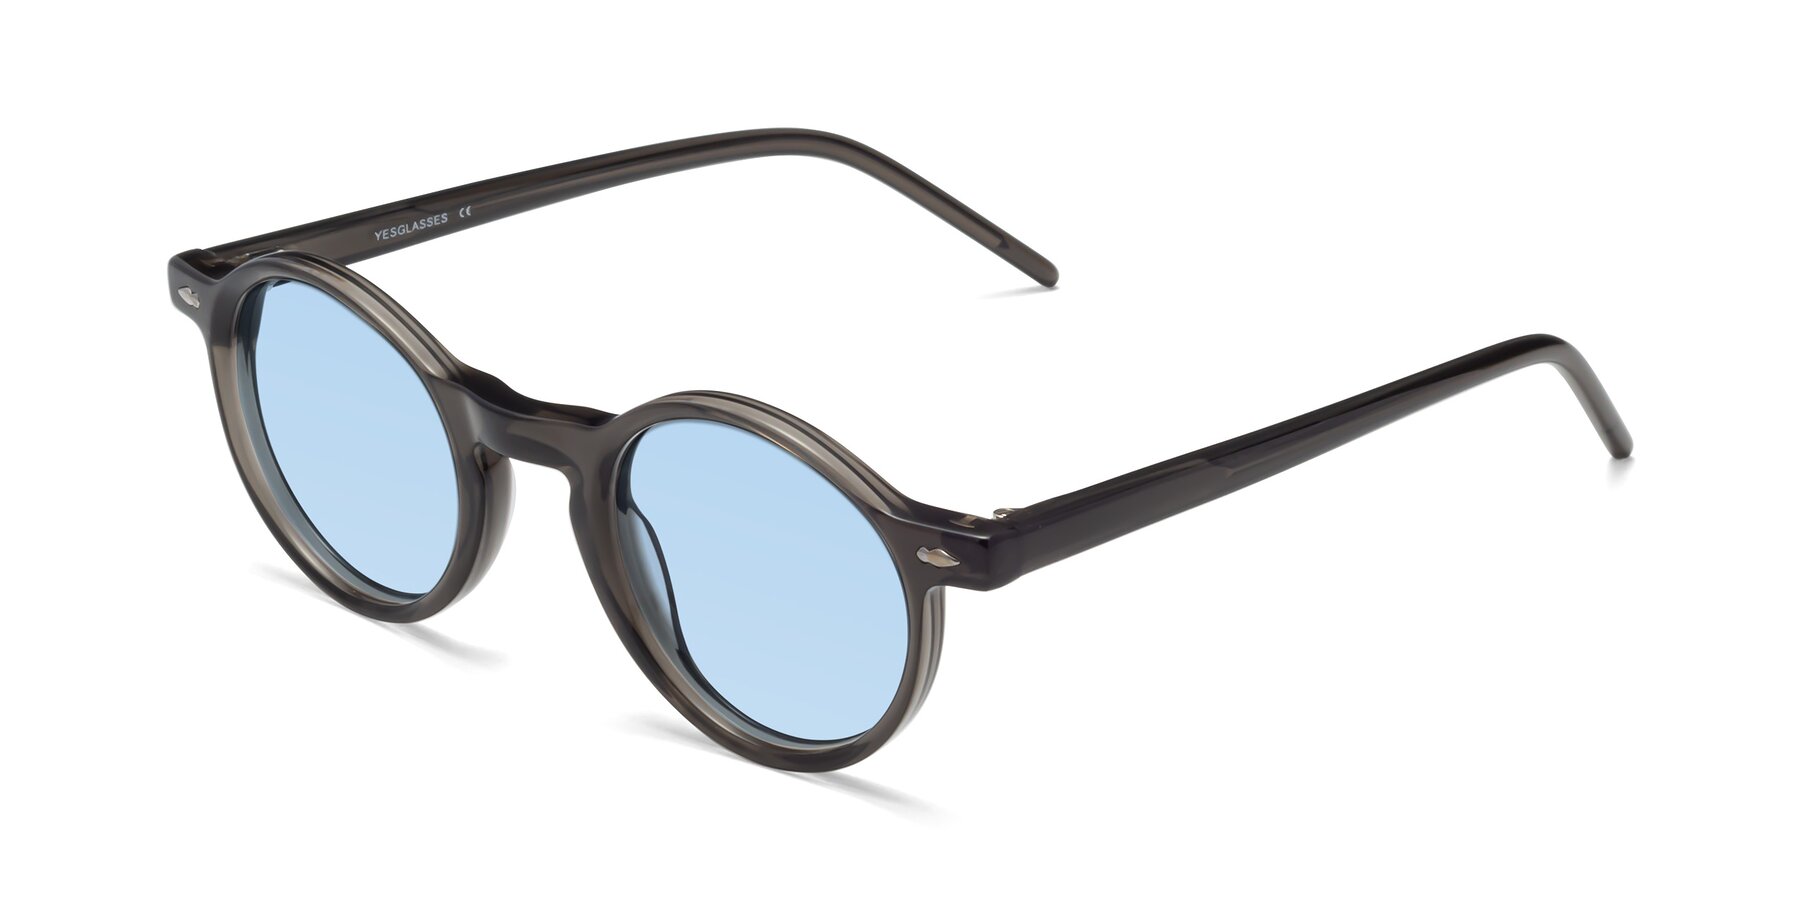 Angle of 1542 in Gray with Light Blue Tinted Lenses